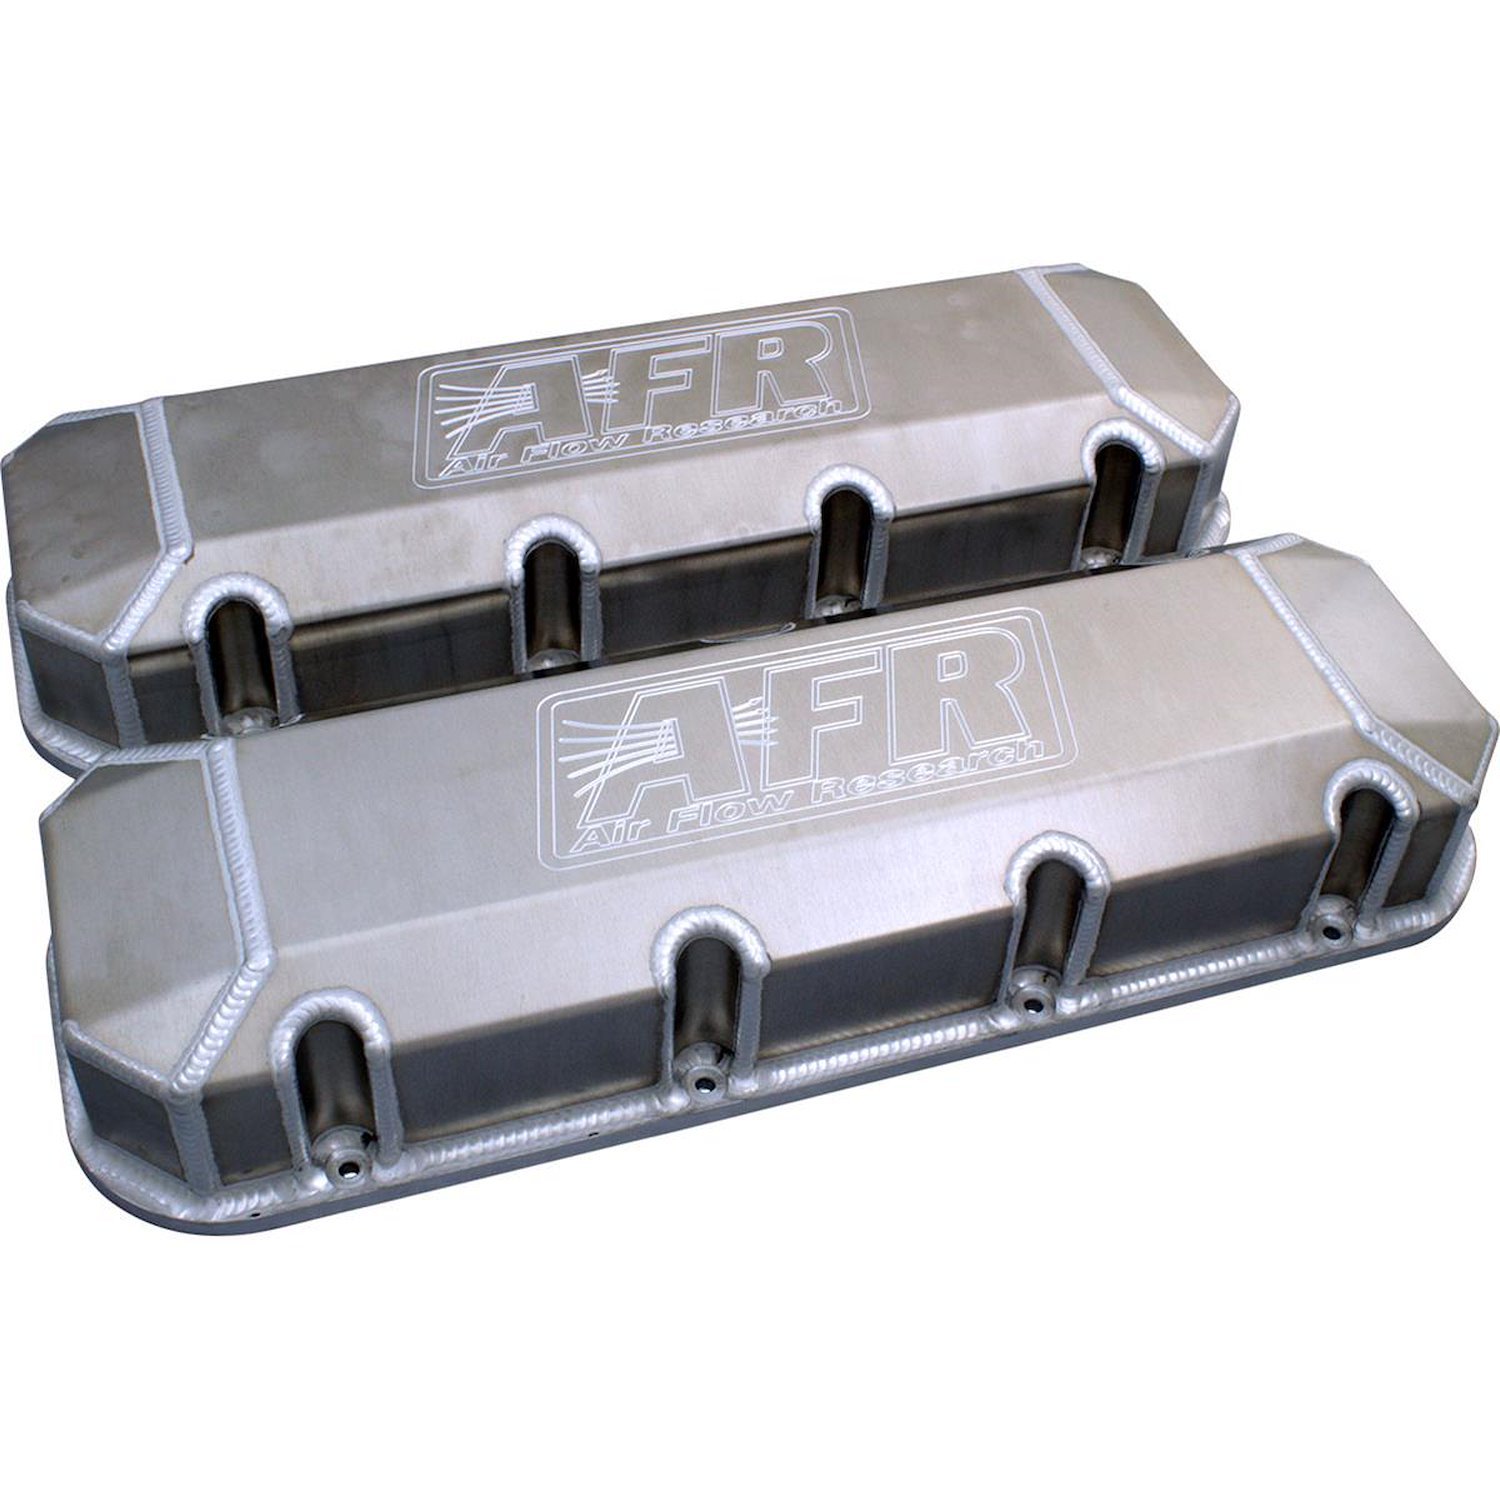 Fabricated Sheet Metal Valve Covers for Big Block